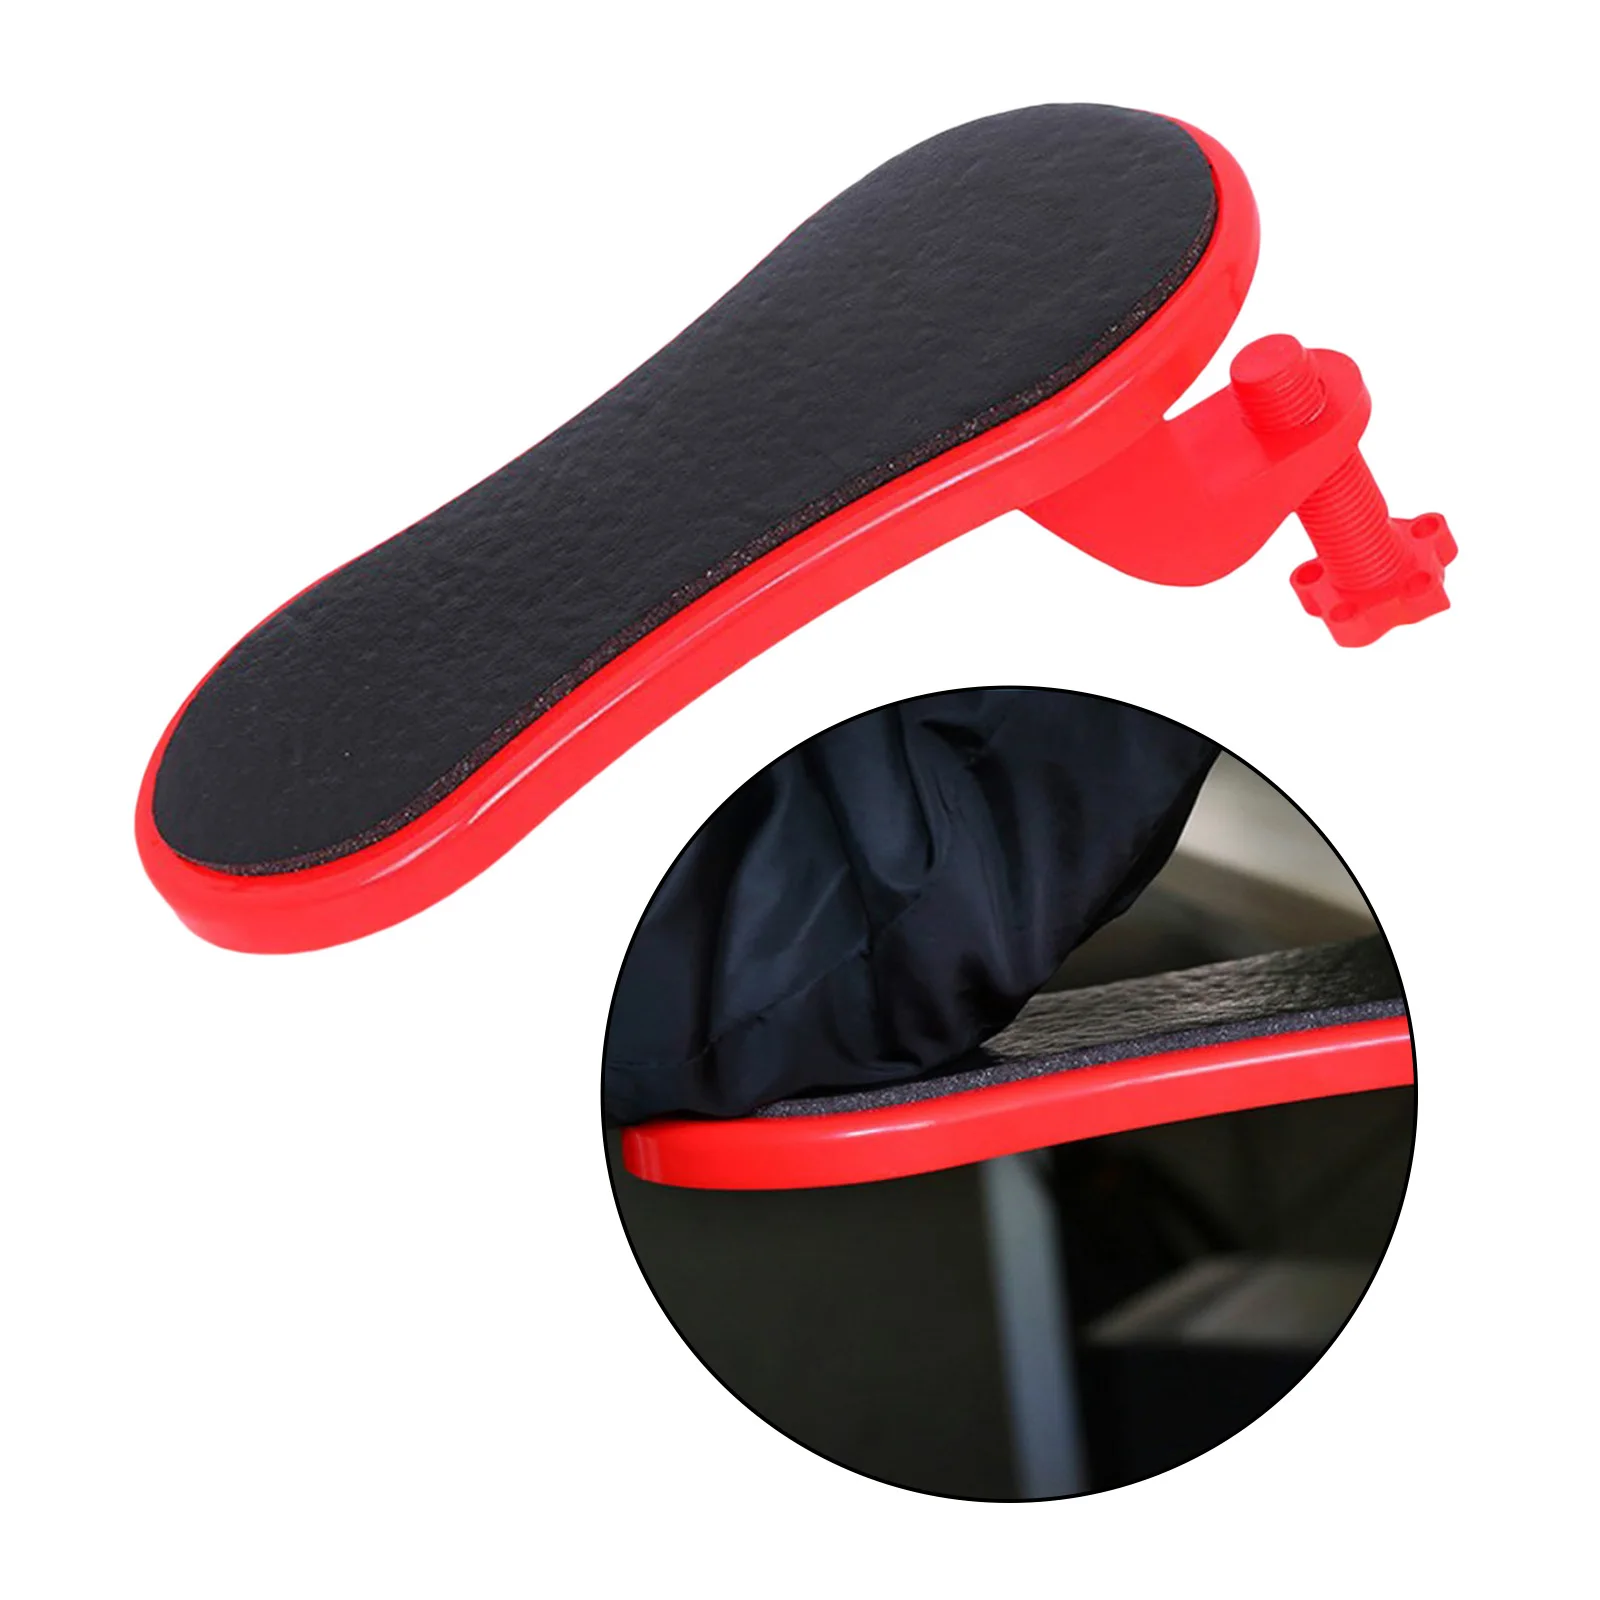 Computer Office Arm Rest Pad Mouse Pad Holder Attachable for Desk Arm Rest Extender Home Table Office Chair